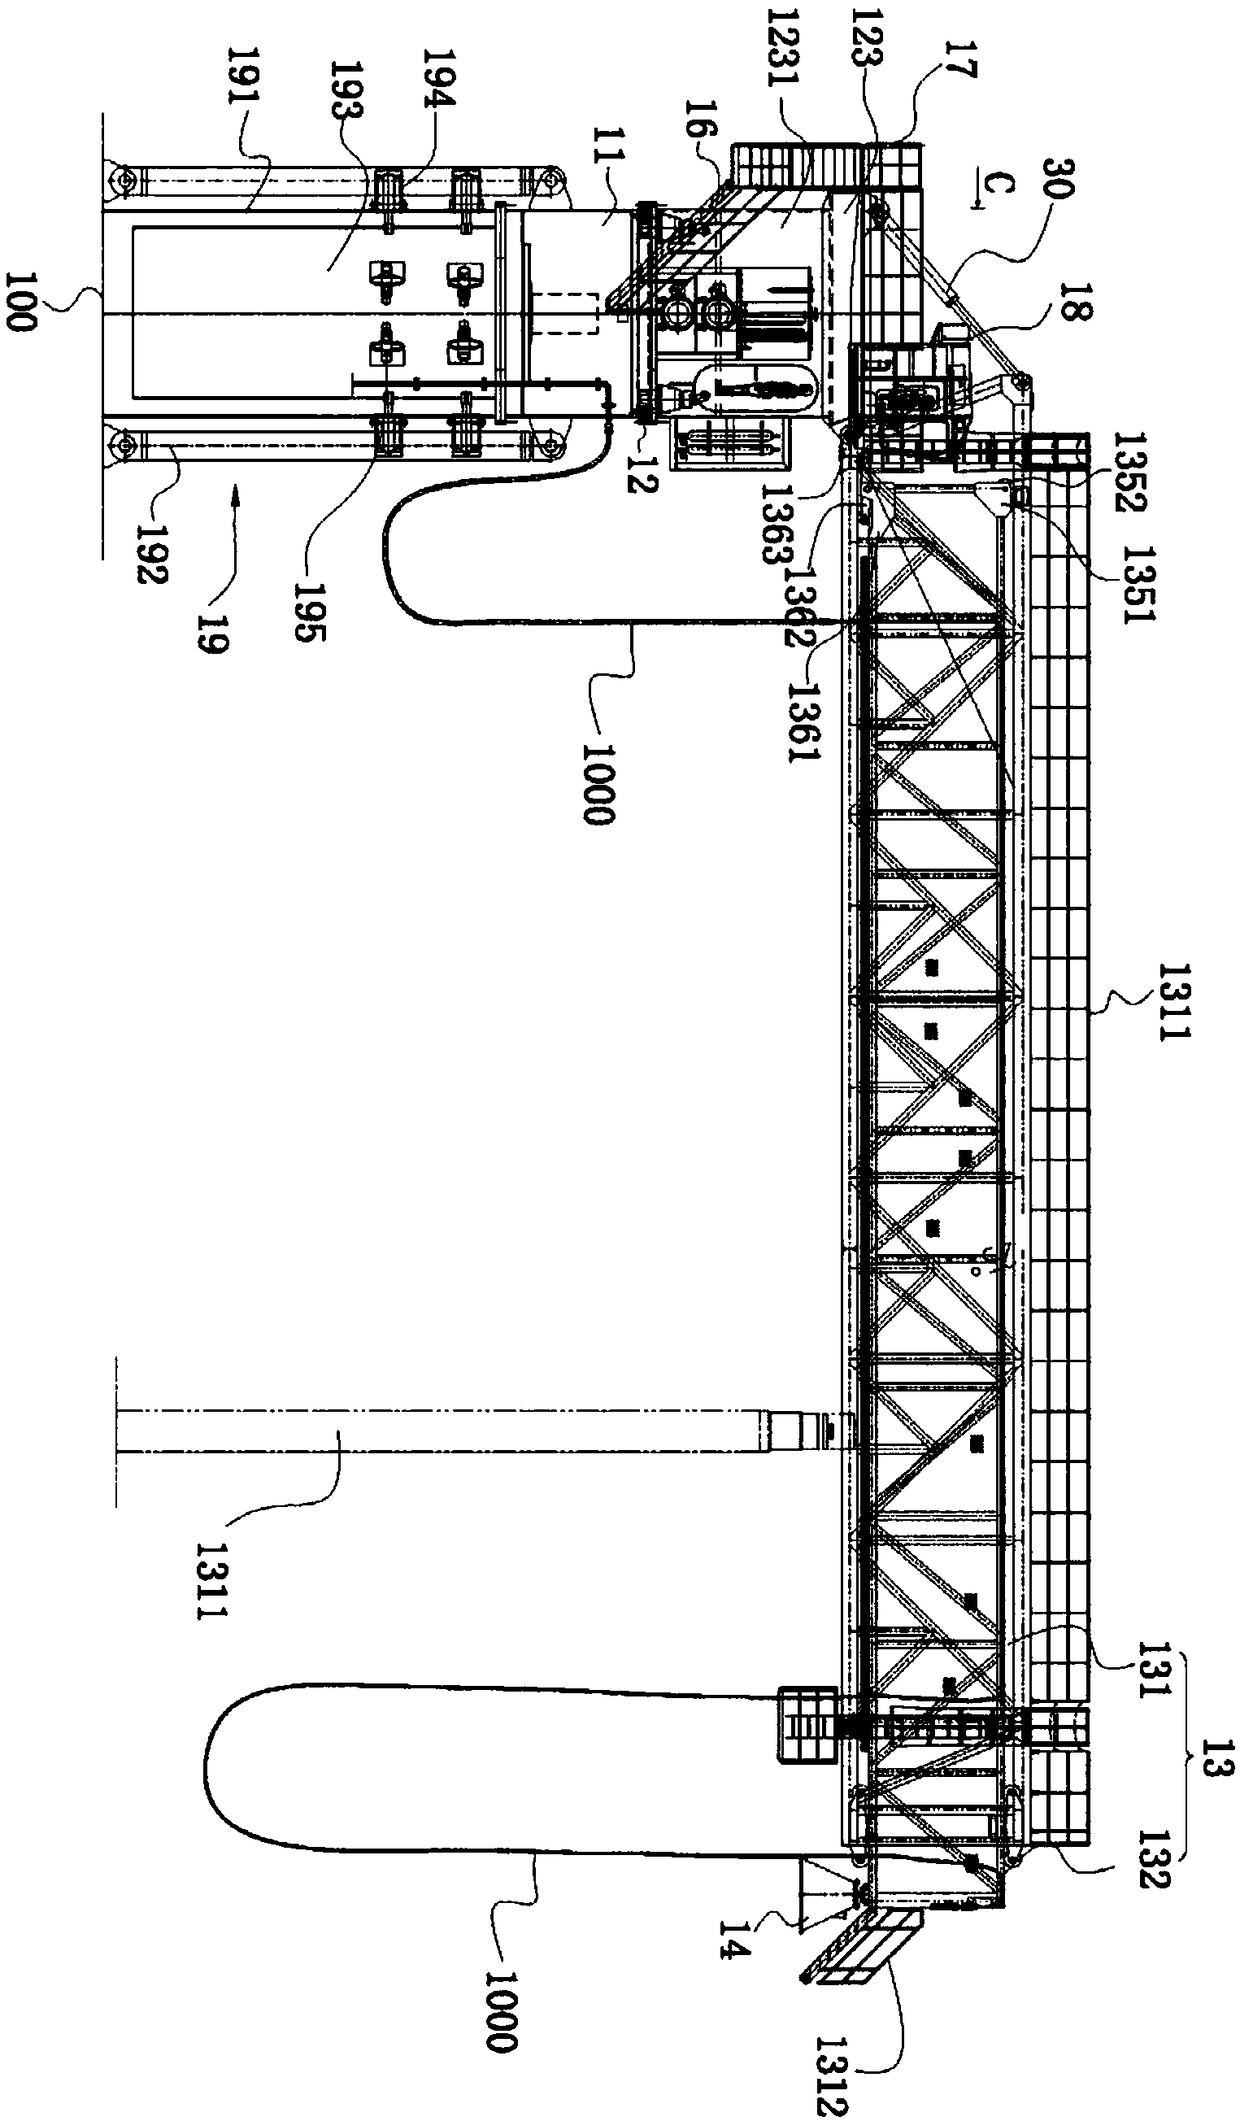 Position compensation extendable-and-retractable type boarding trestle hydraulic system